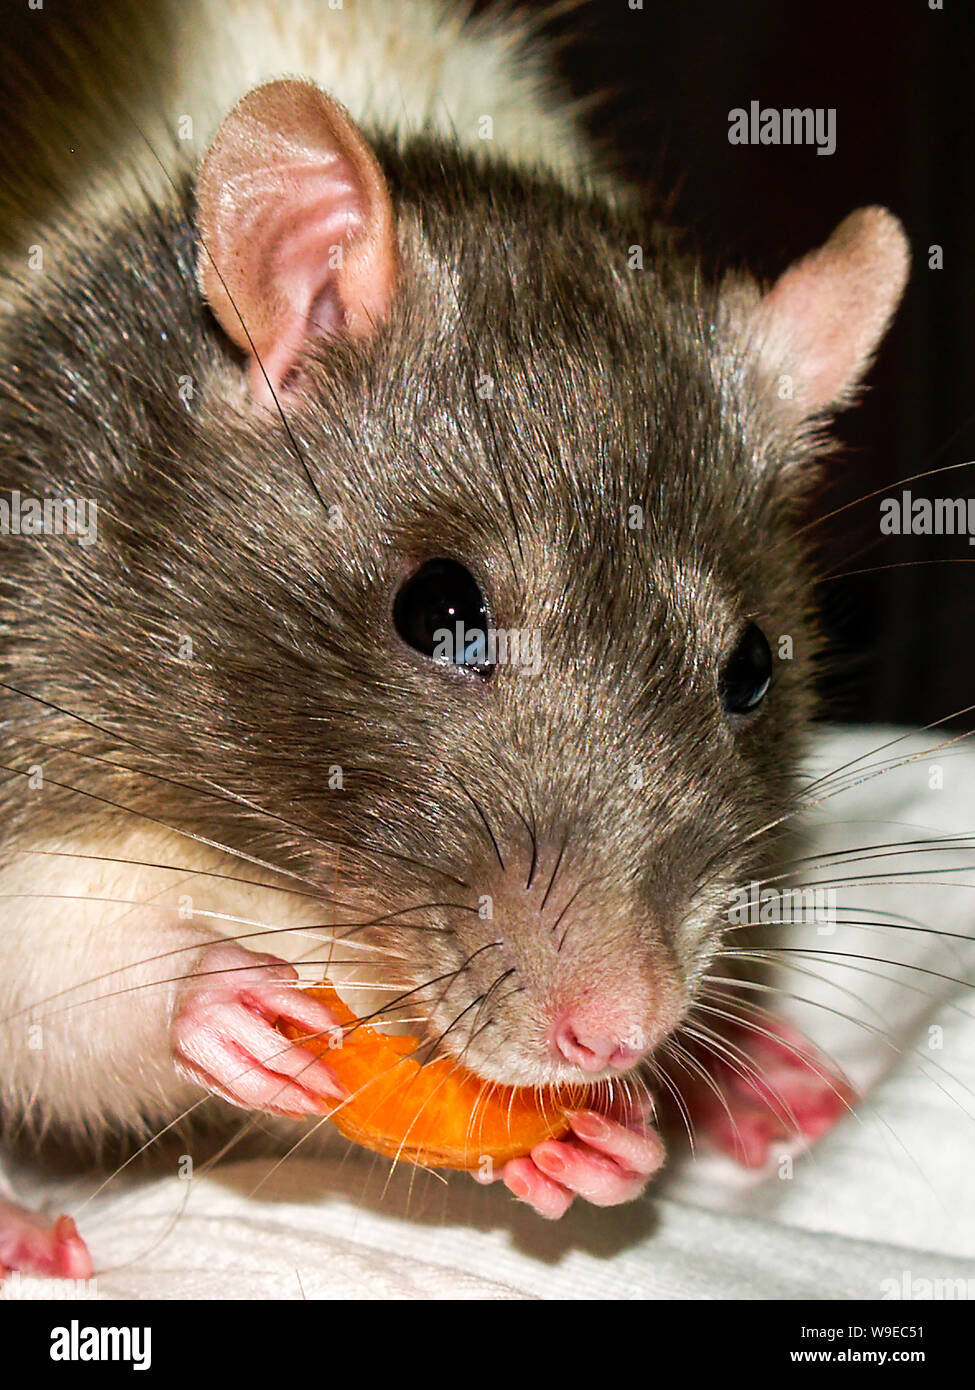 A domesticated pet rat holding and eating a slice of carrot. Stock Photo